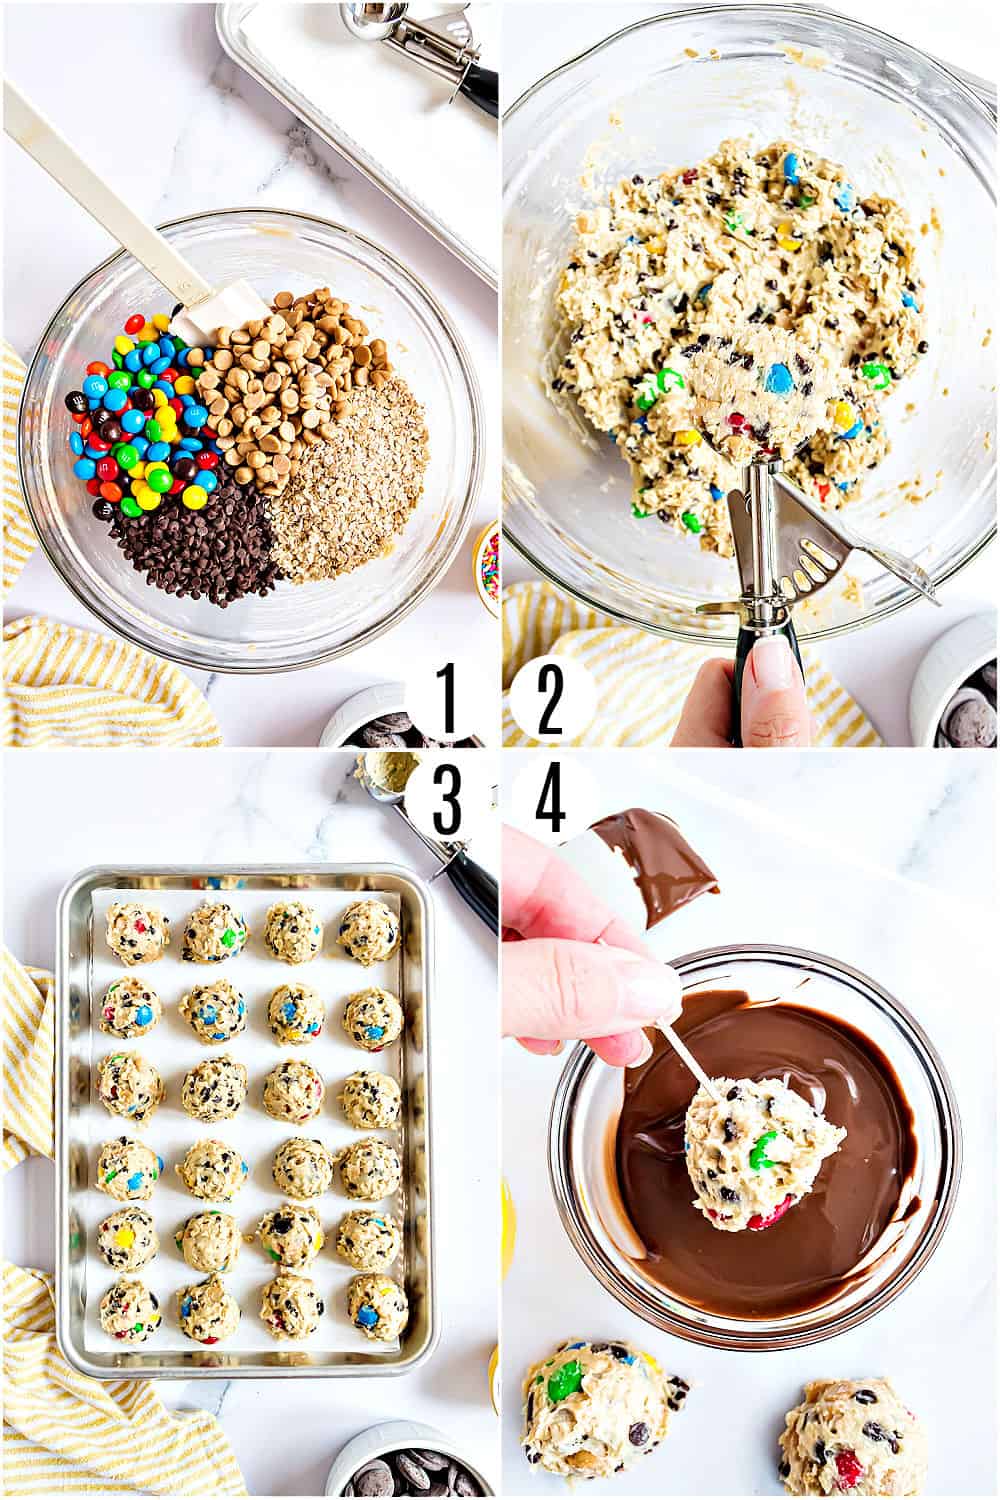 Step by step photos showing how to make monster cookie dough truffles.